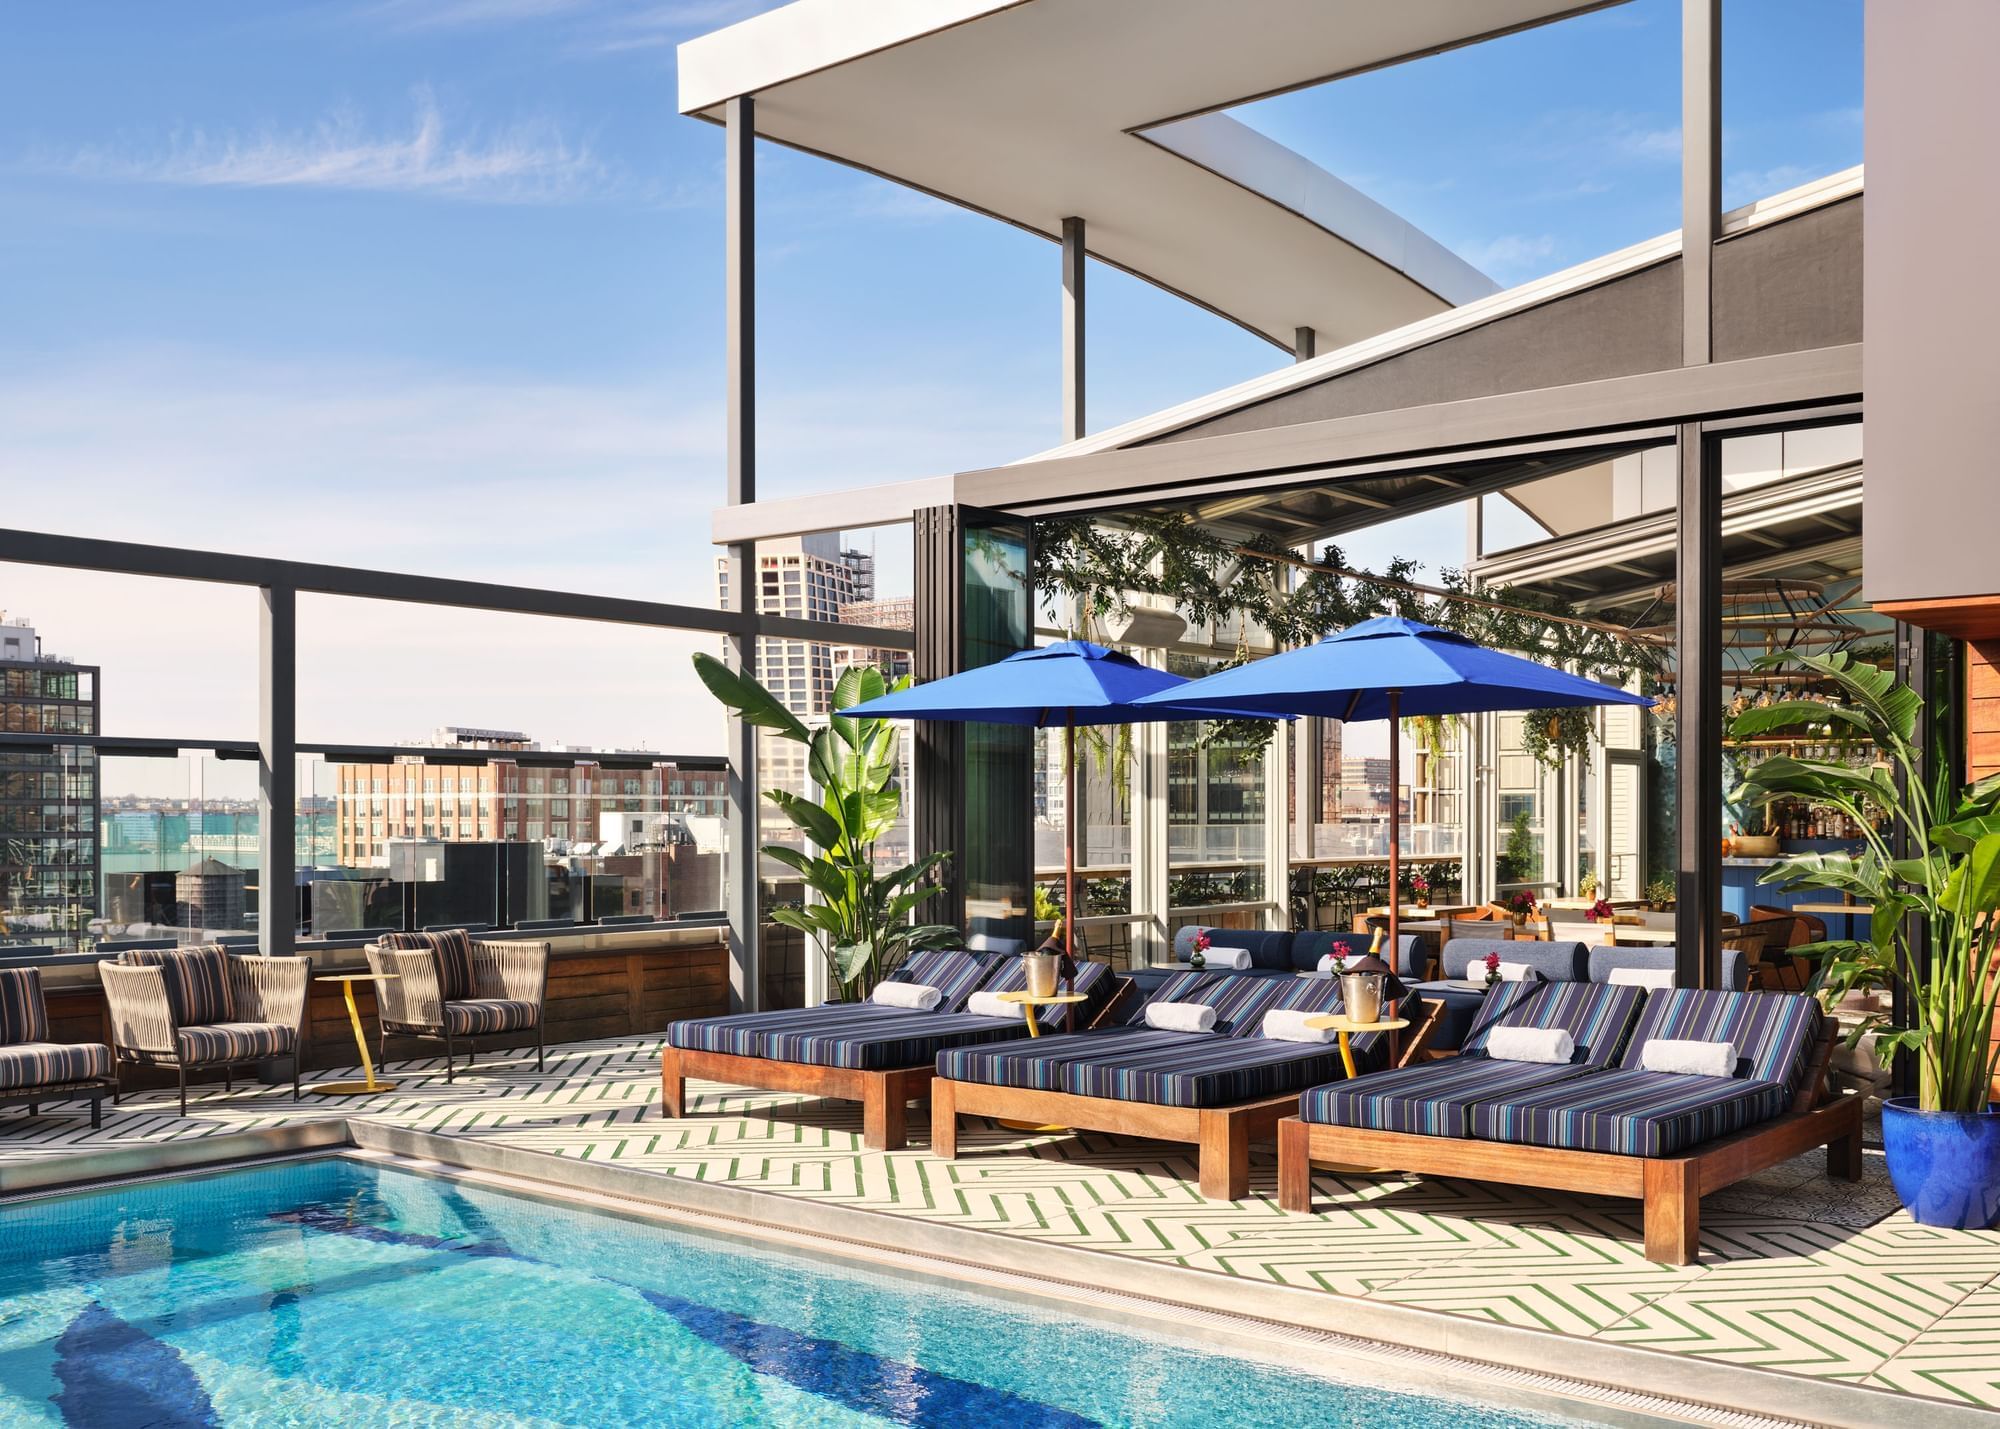 Rooftop pool area with daybed lounge chairs 